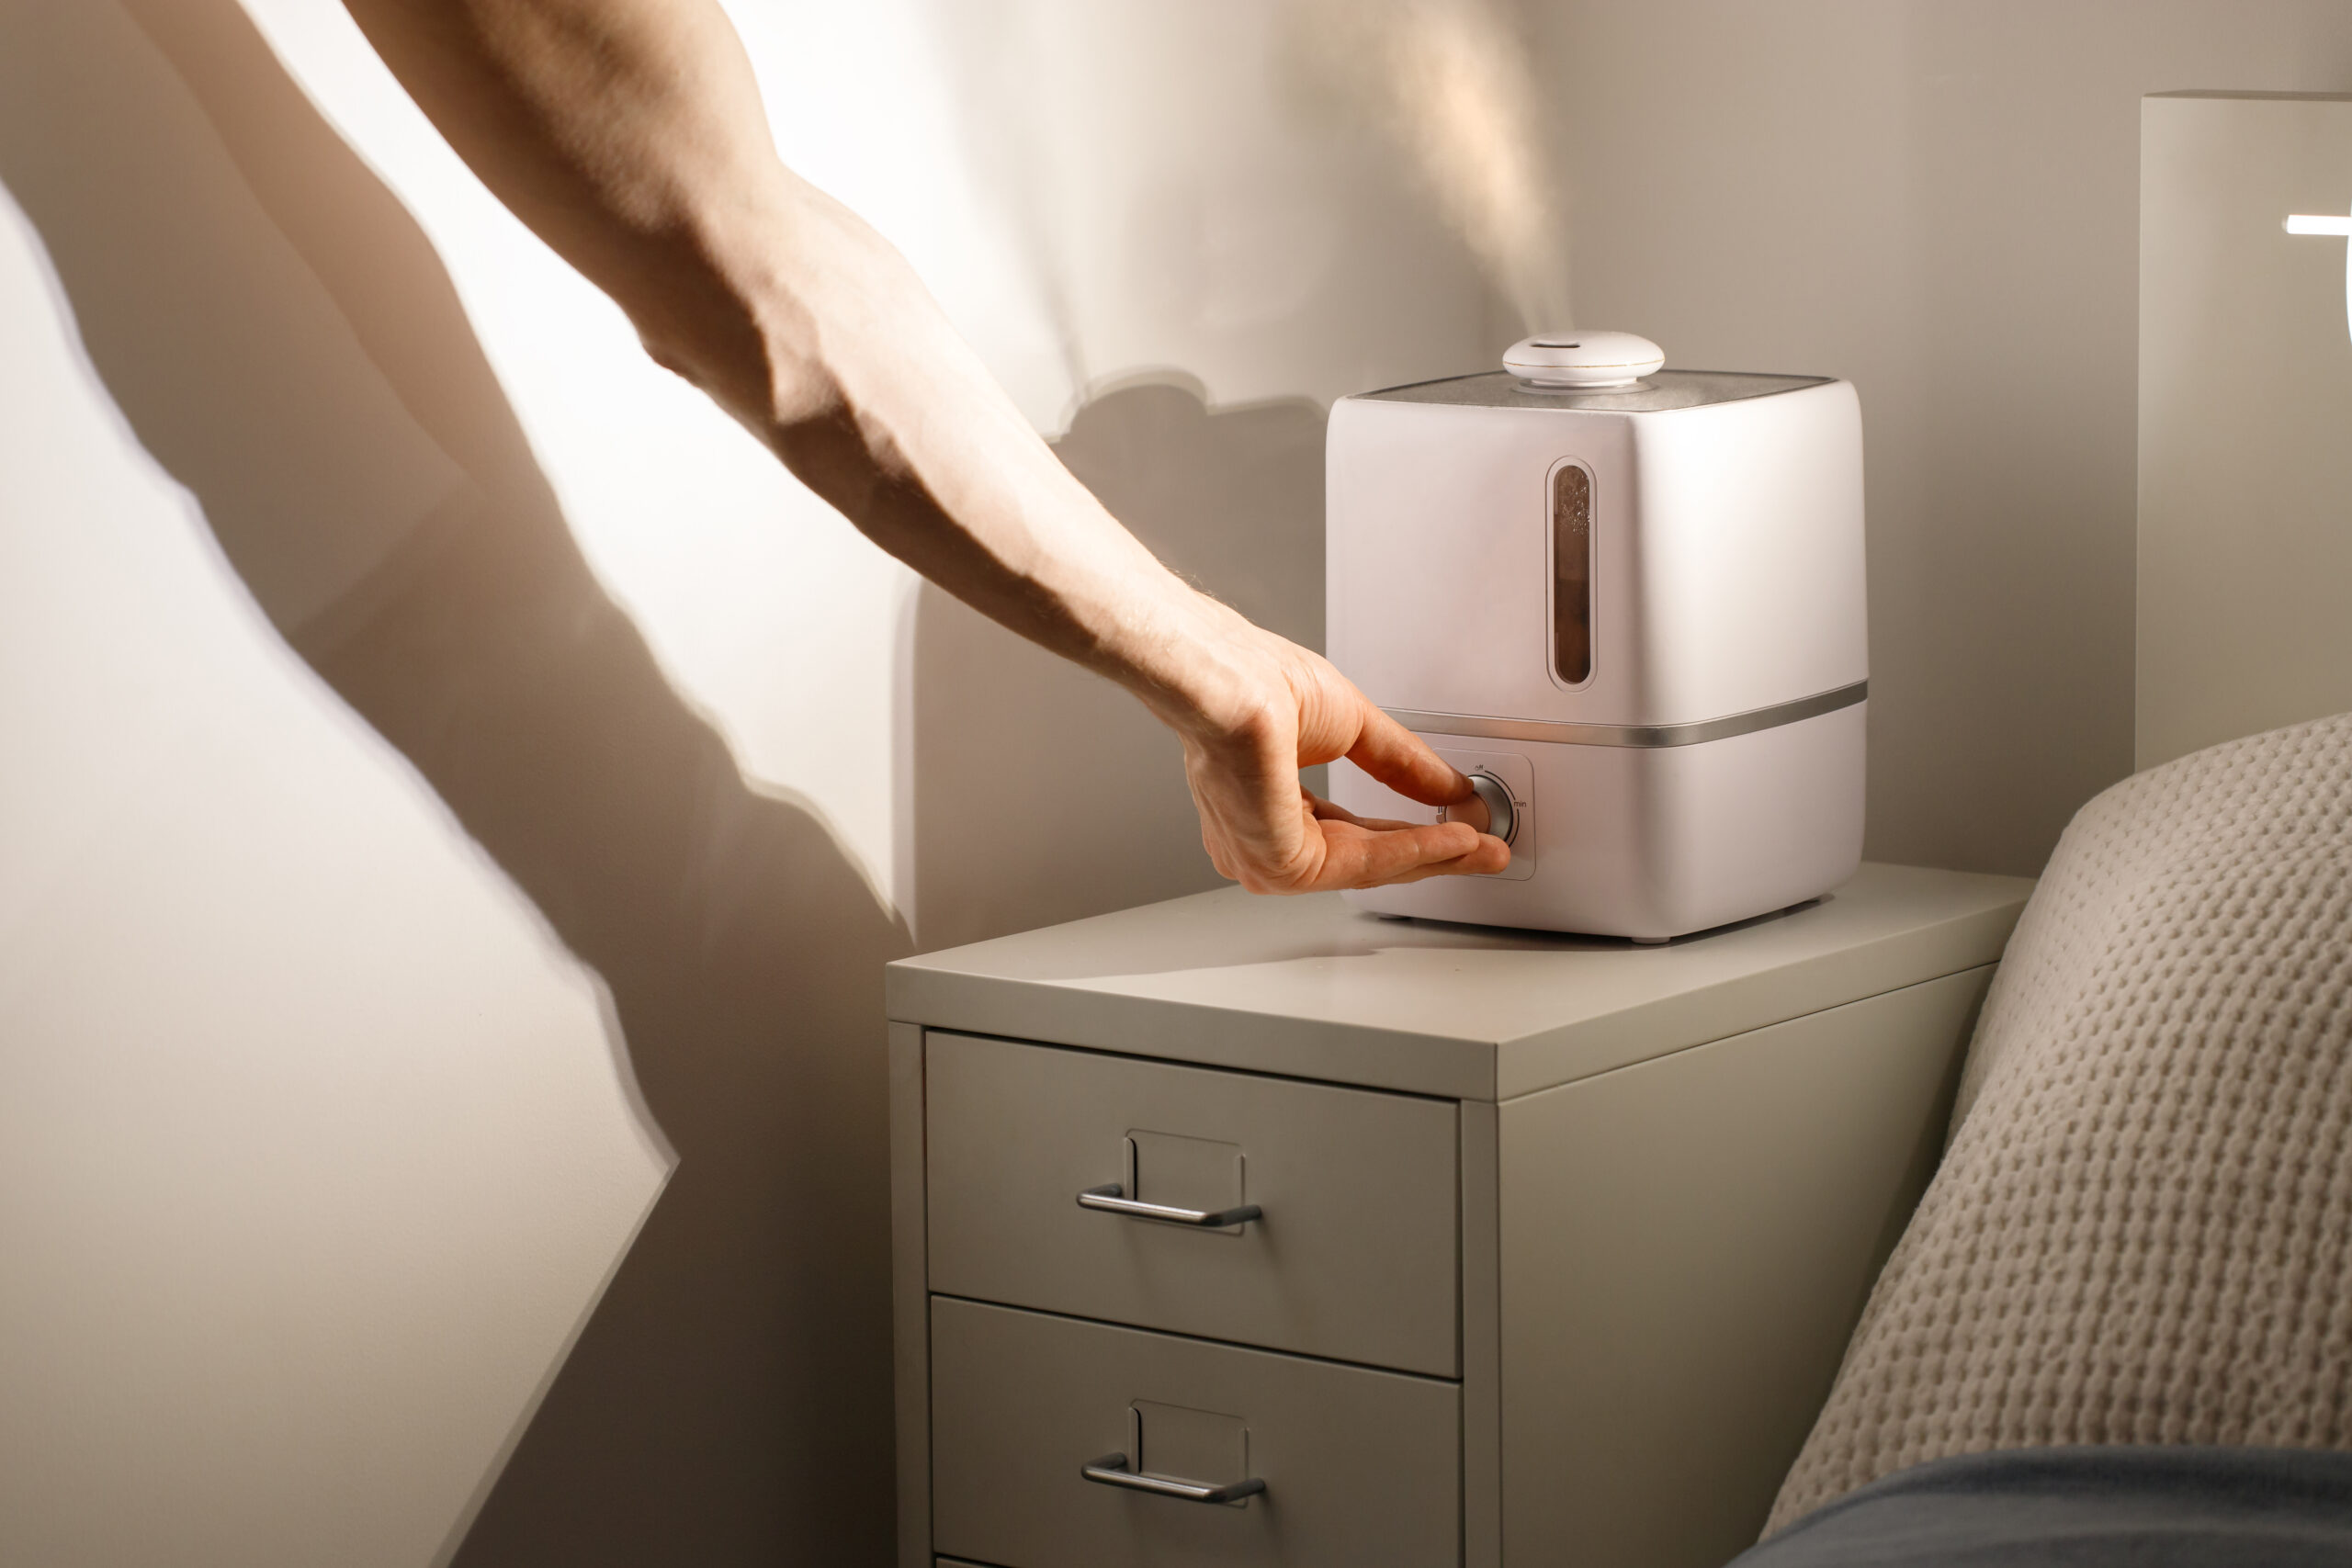 Hand turn on humidifier on the bedside table